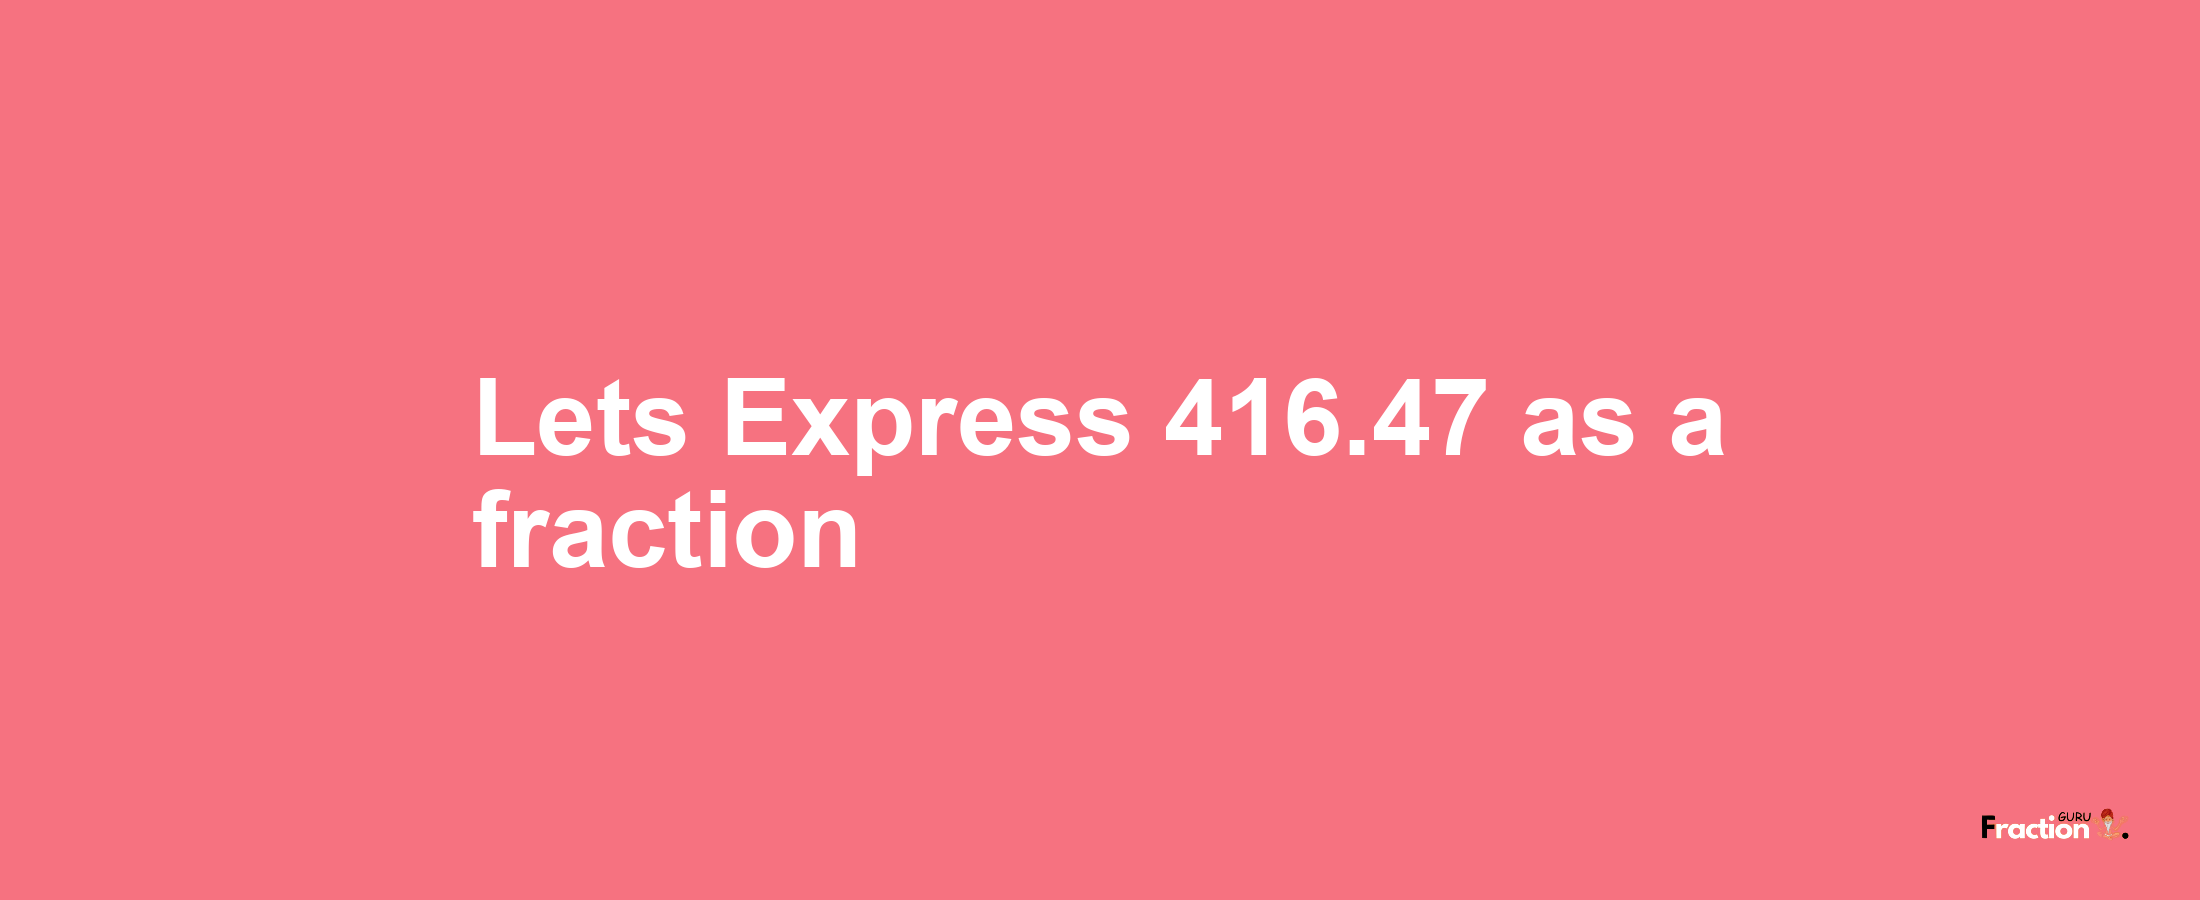 Lets Express 416.47 as afraction